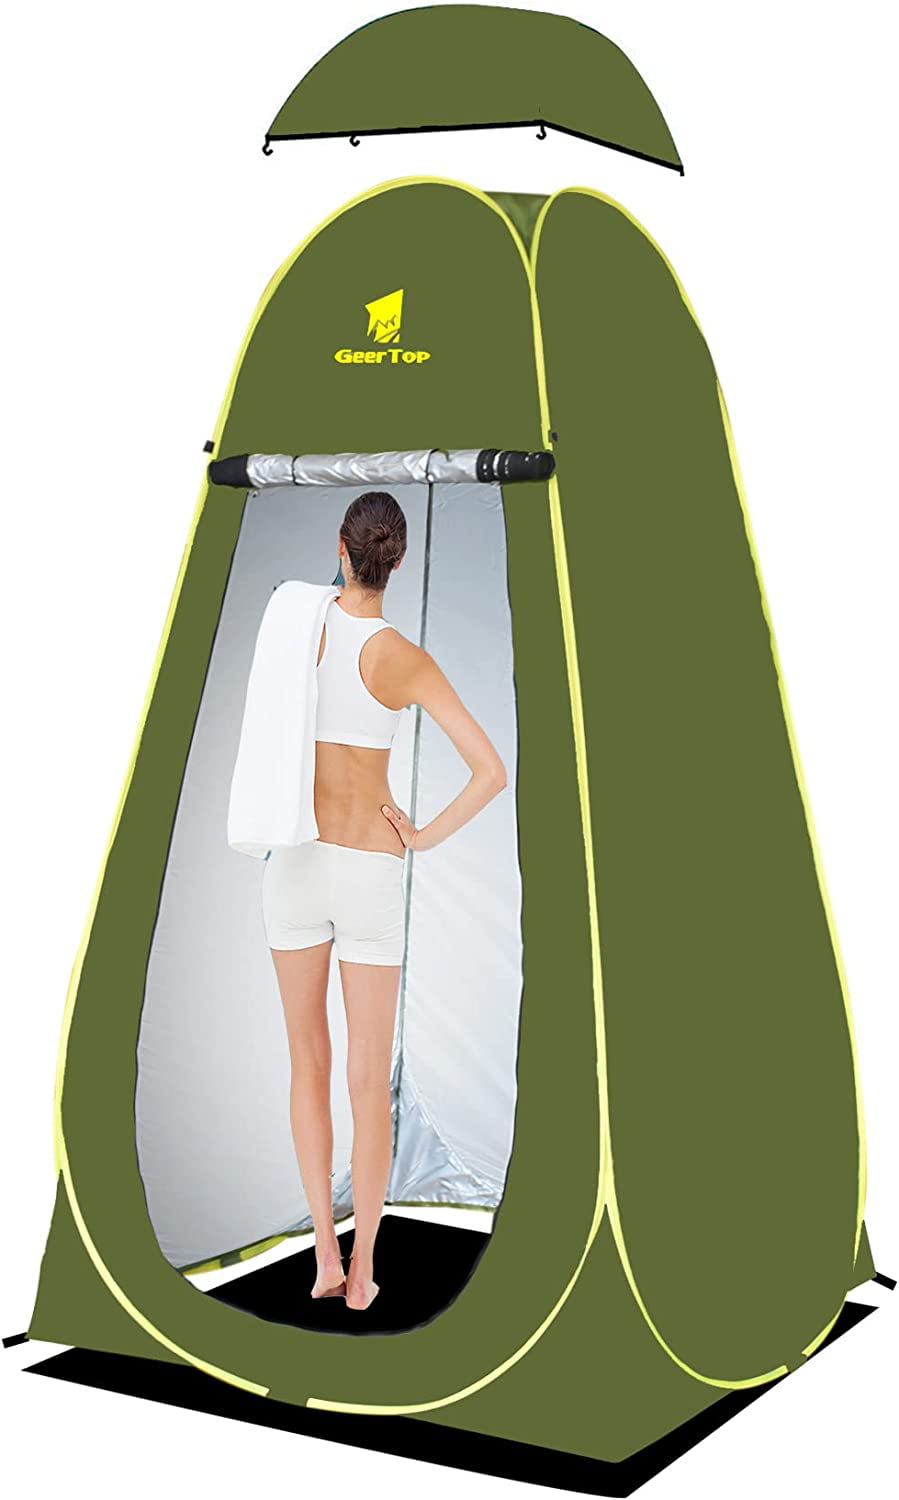 Portable Instant Pop Up Tent Outdoor Camping Toilet Dressing Shower Changing Tent & Toilet Privacy Room for Camping Beach Caravan Picnic Fishing and Festivals Holidays 